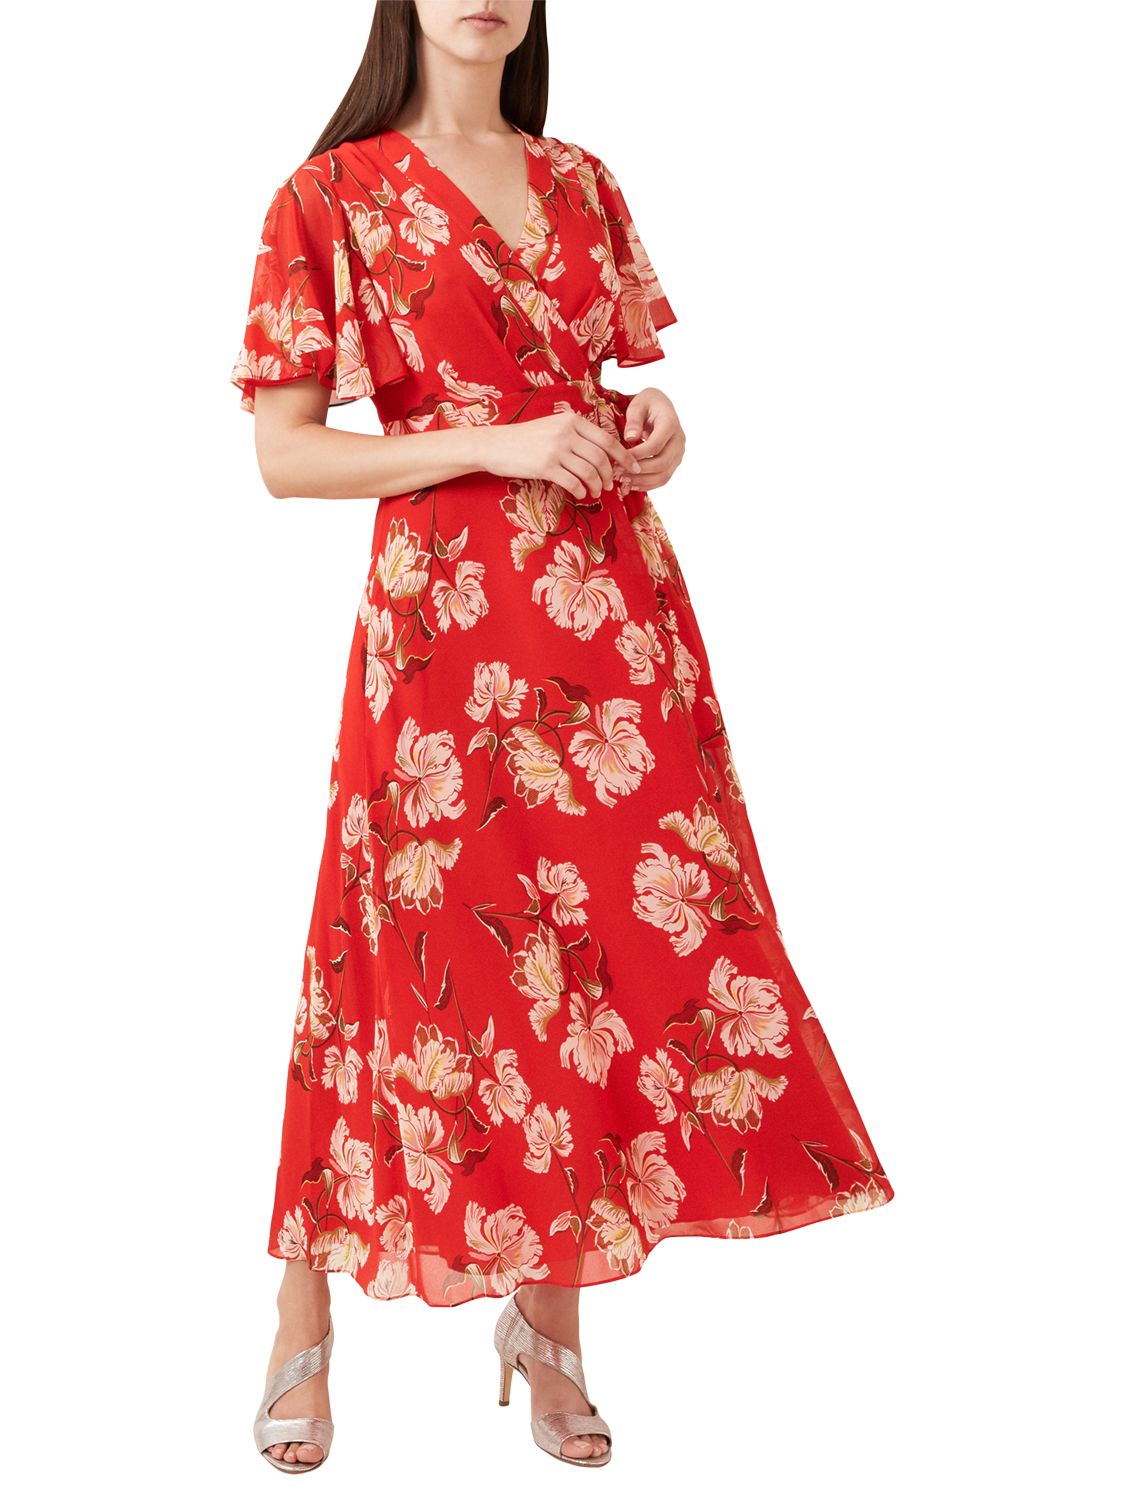 house of fraser dresses for special occasions